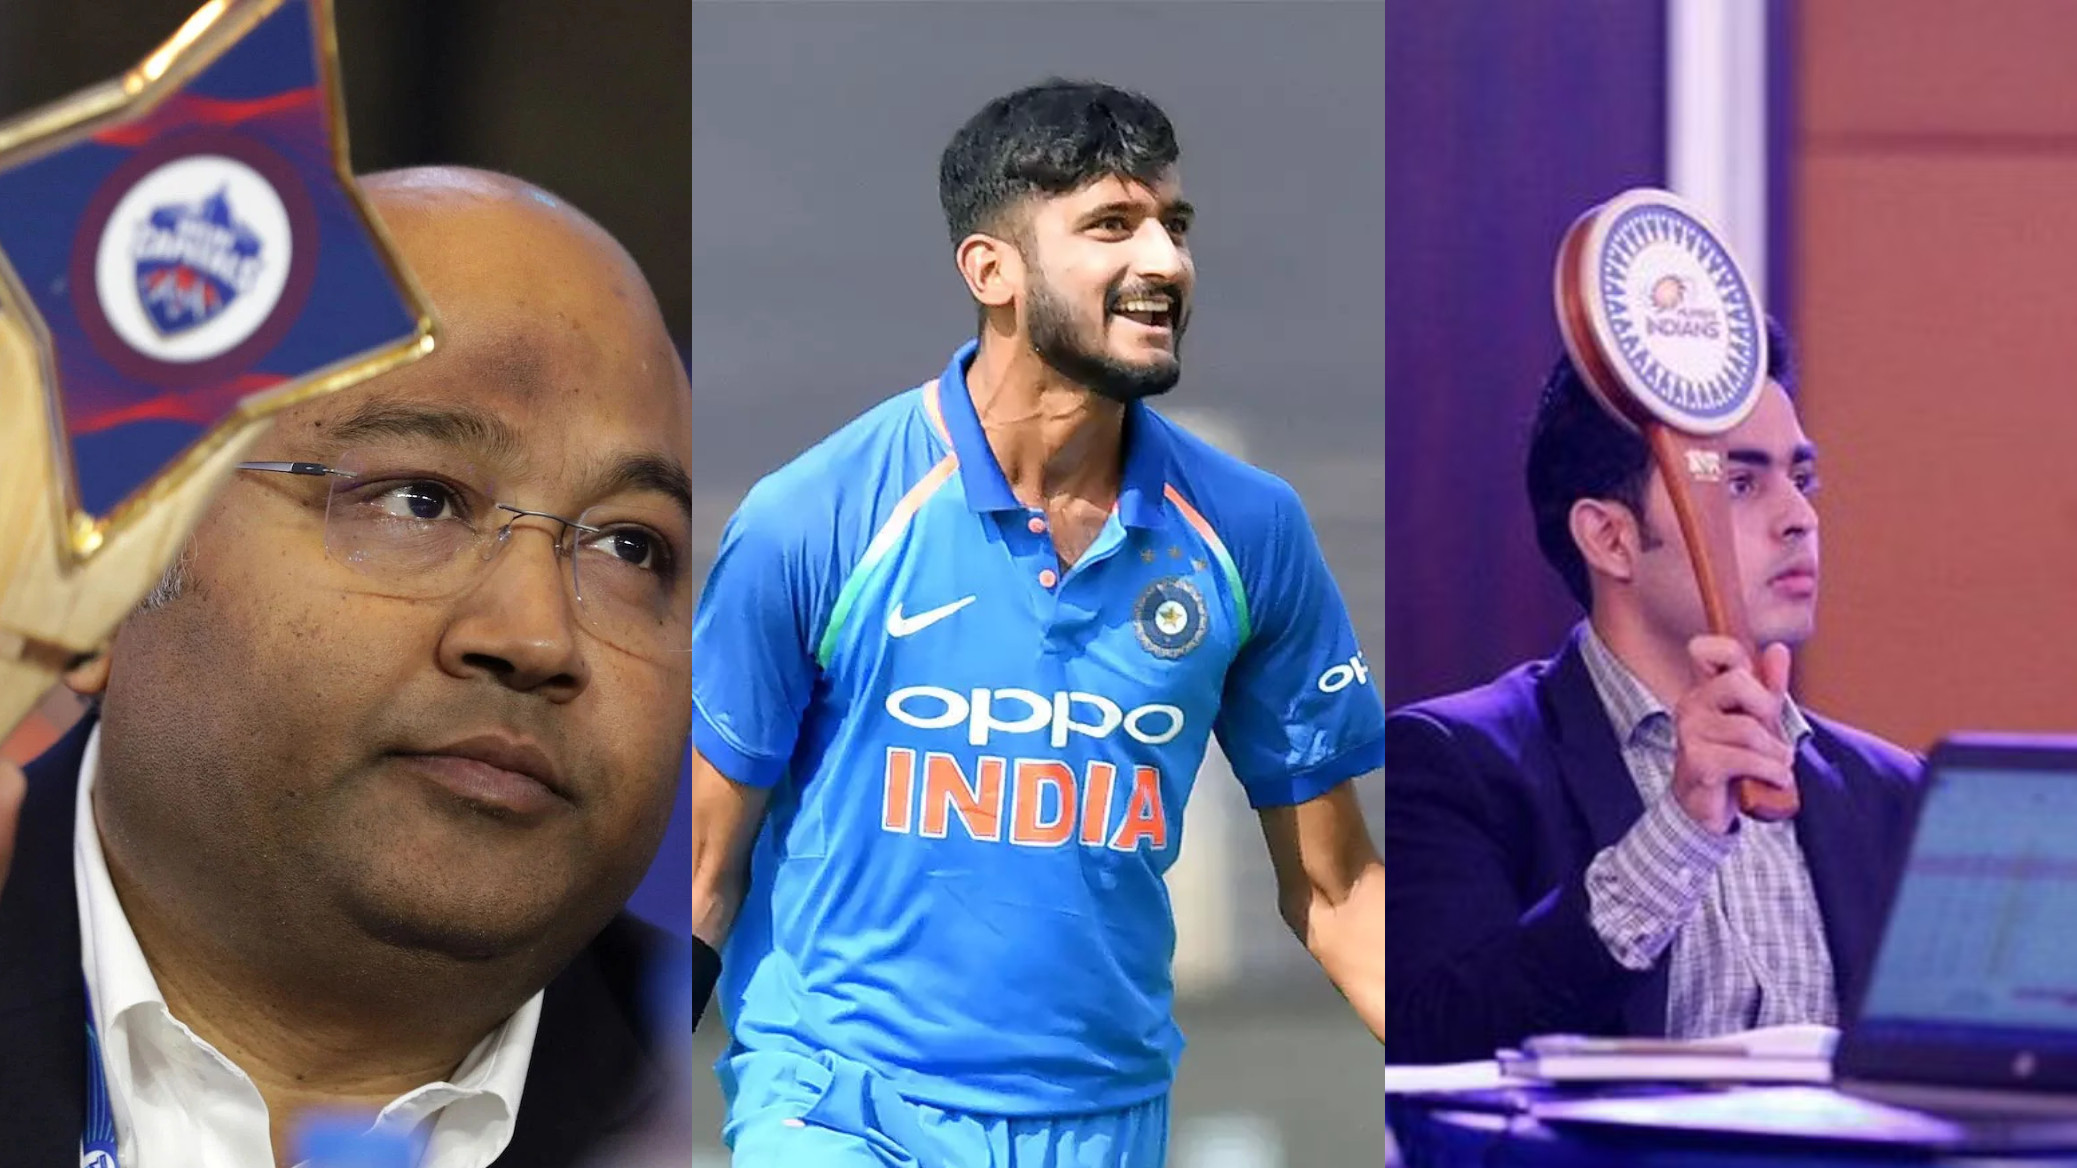 WATCH- Mix up at IPL 2022 auction allows Delhi Capitals to poach Khaleel Ahmed from Mumbai Indians